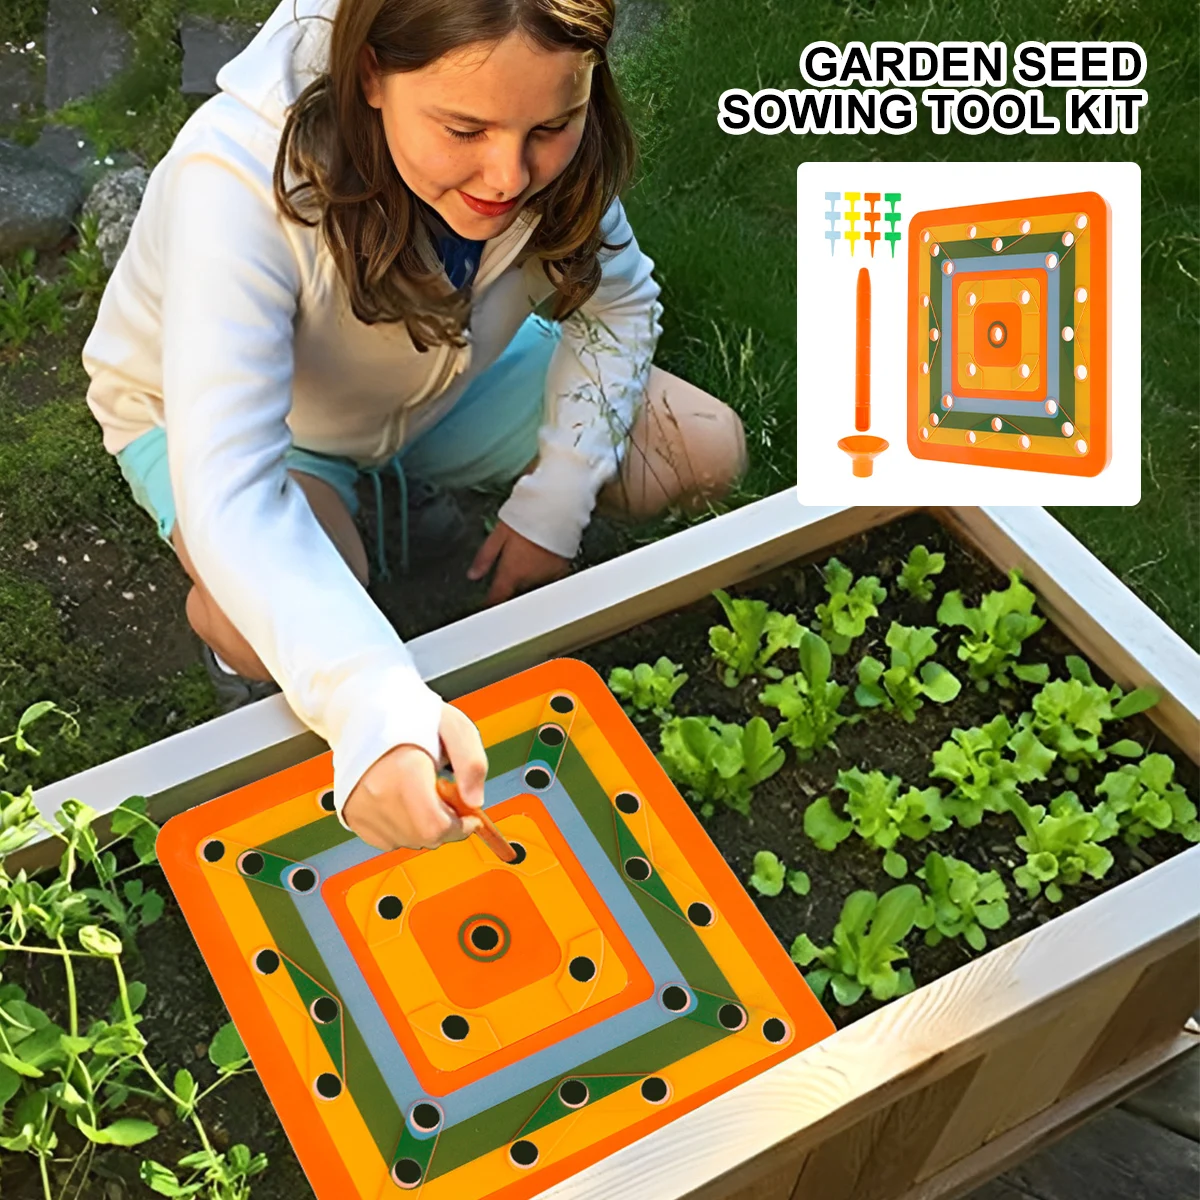 

NewSeed Sowing Tool Kit Square Foot Seeds Spacer Template Set Reusable Vegetable Seed Planter Tools Colorful Gardening Spacing